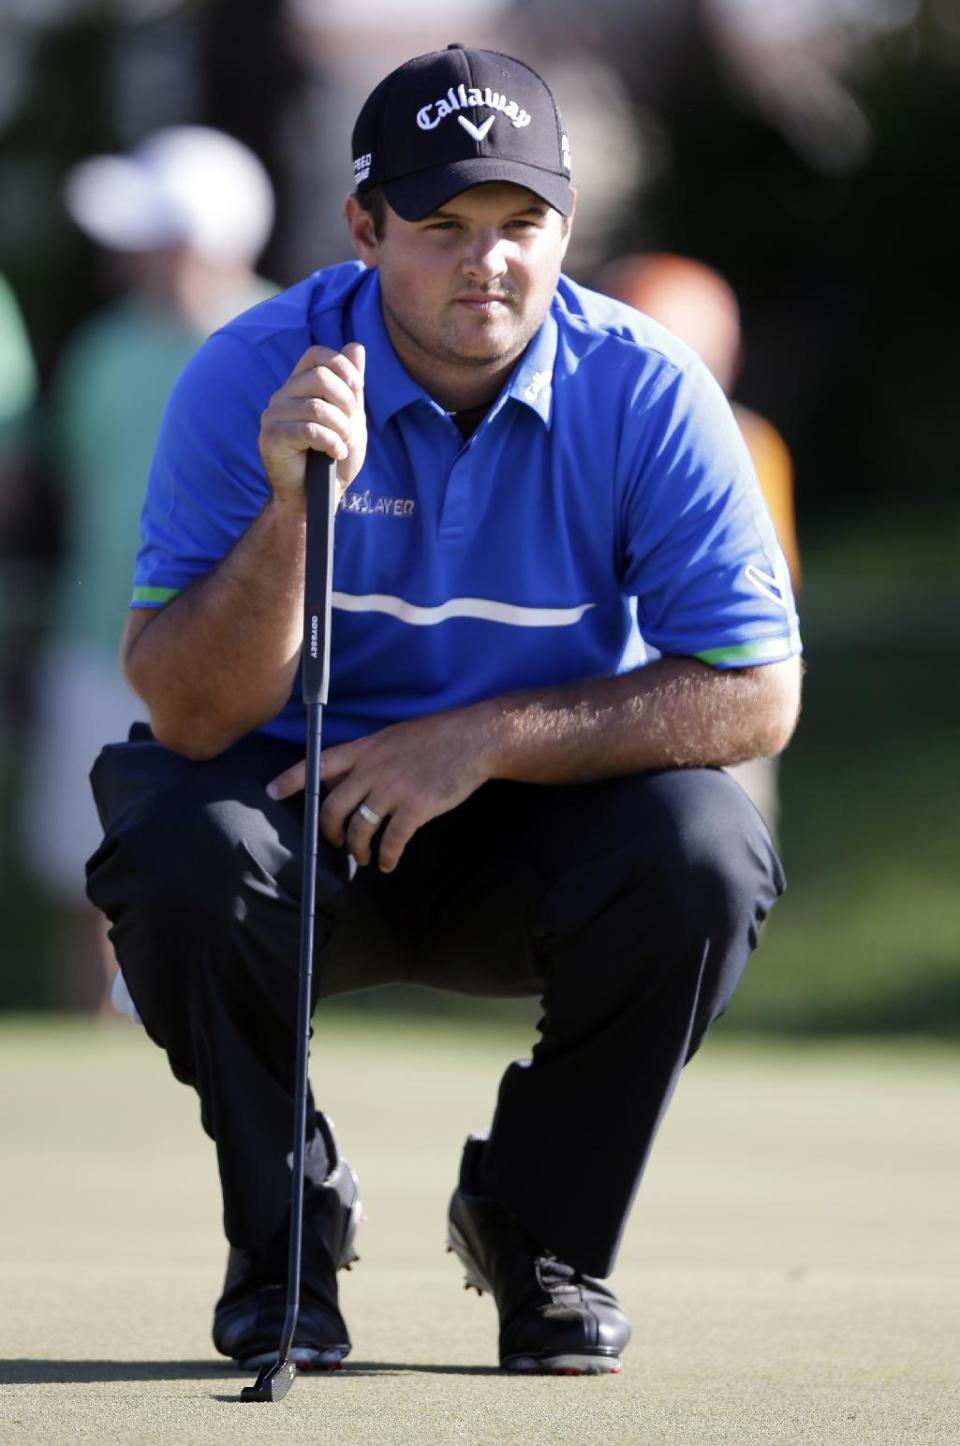 Patrick Reed takes a look at his shot on the 12th green during the third round of the Cadillac Championship golf tournament Saturday, March 8, 2014, in Doral, Fla. (AP Photo/Wilfredo Lee)